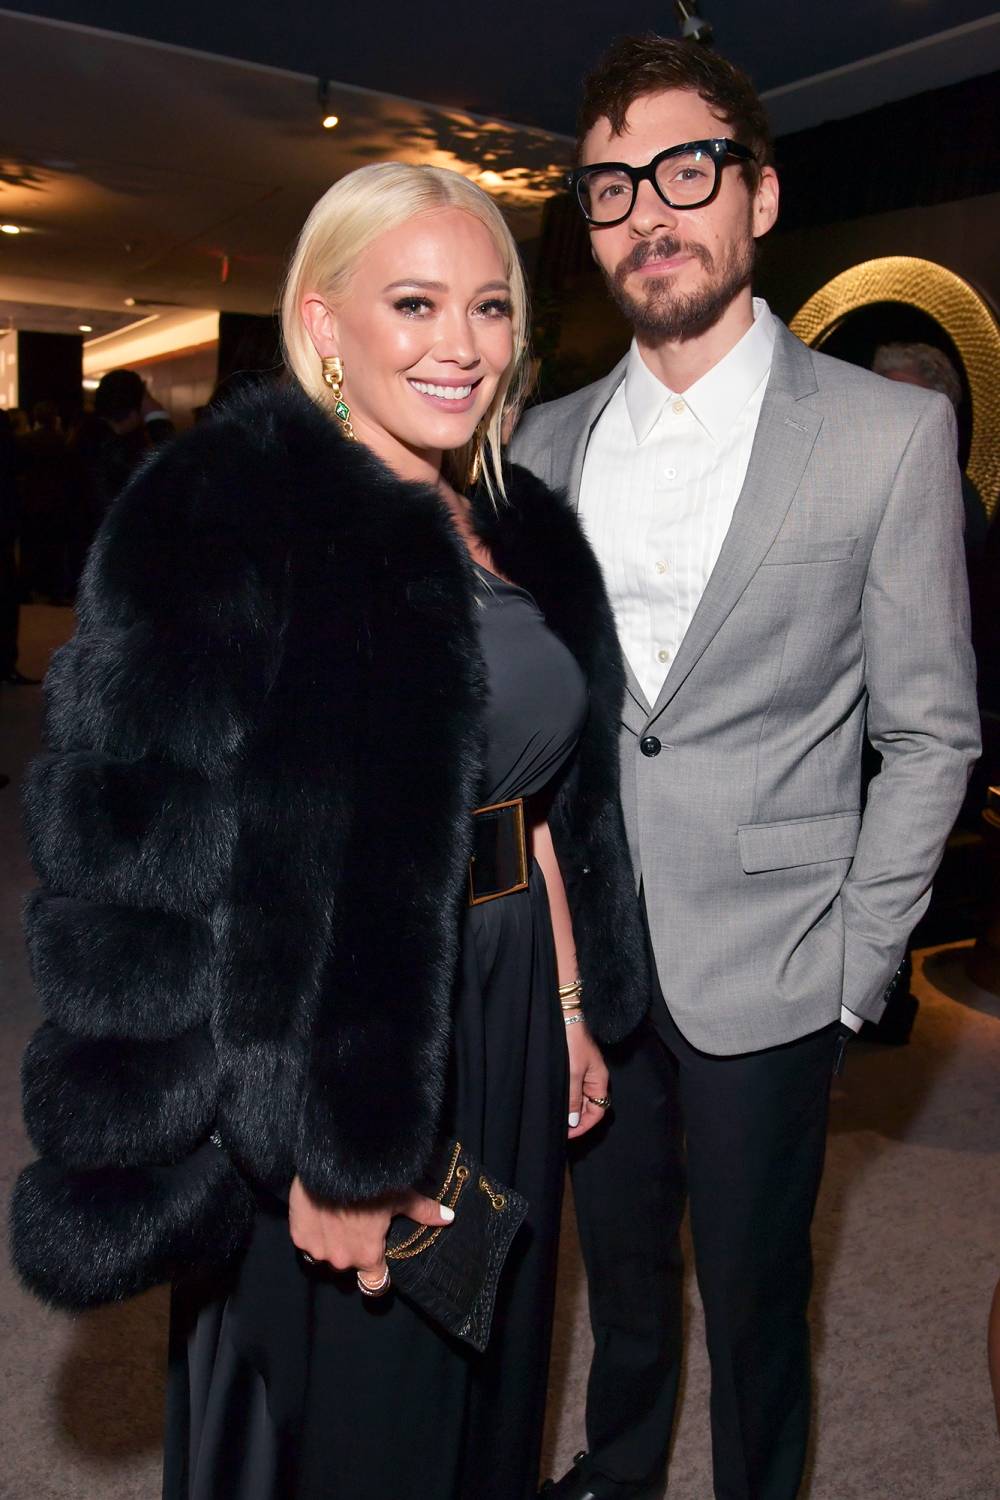 New Mom Hilary Duff and BF Matthew Koma Have ‘Prom Night’ Date at Golden Globes Party